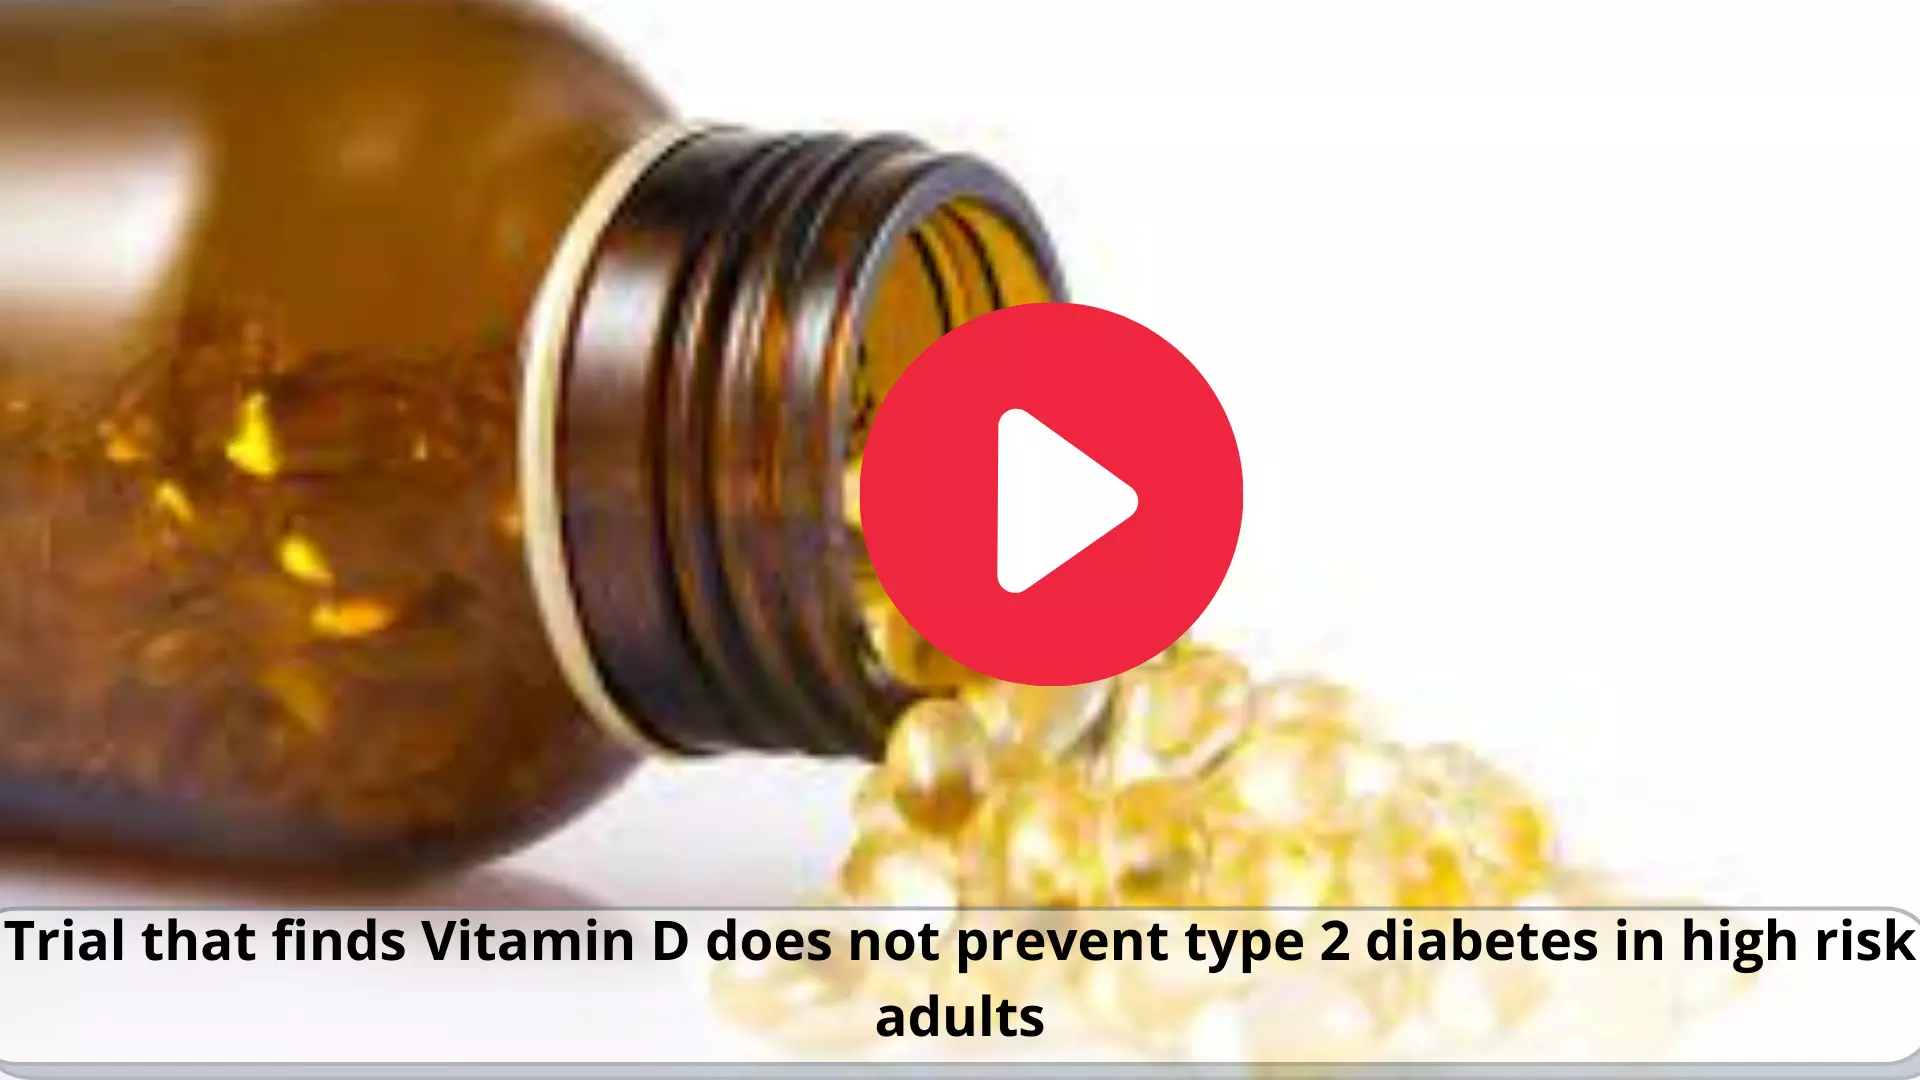 Trial that finds Vitamin D does not prevent type 2 diabetes in high risk adults